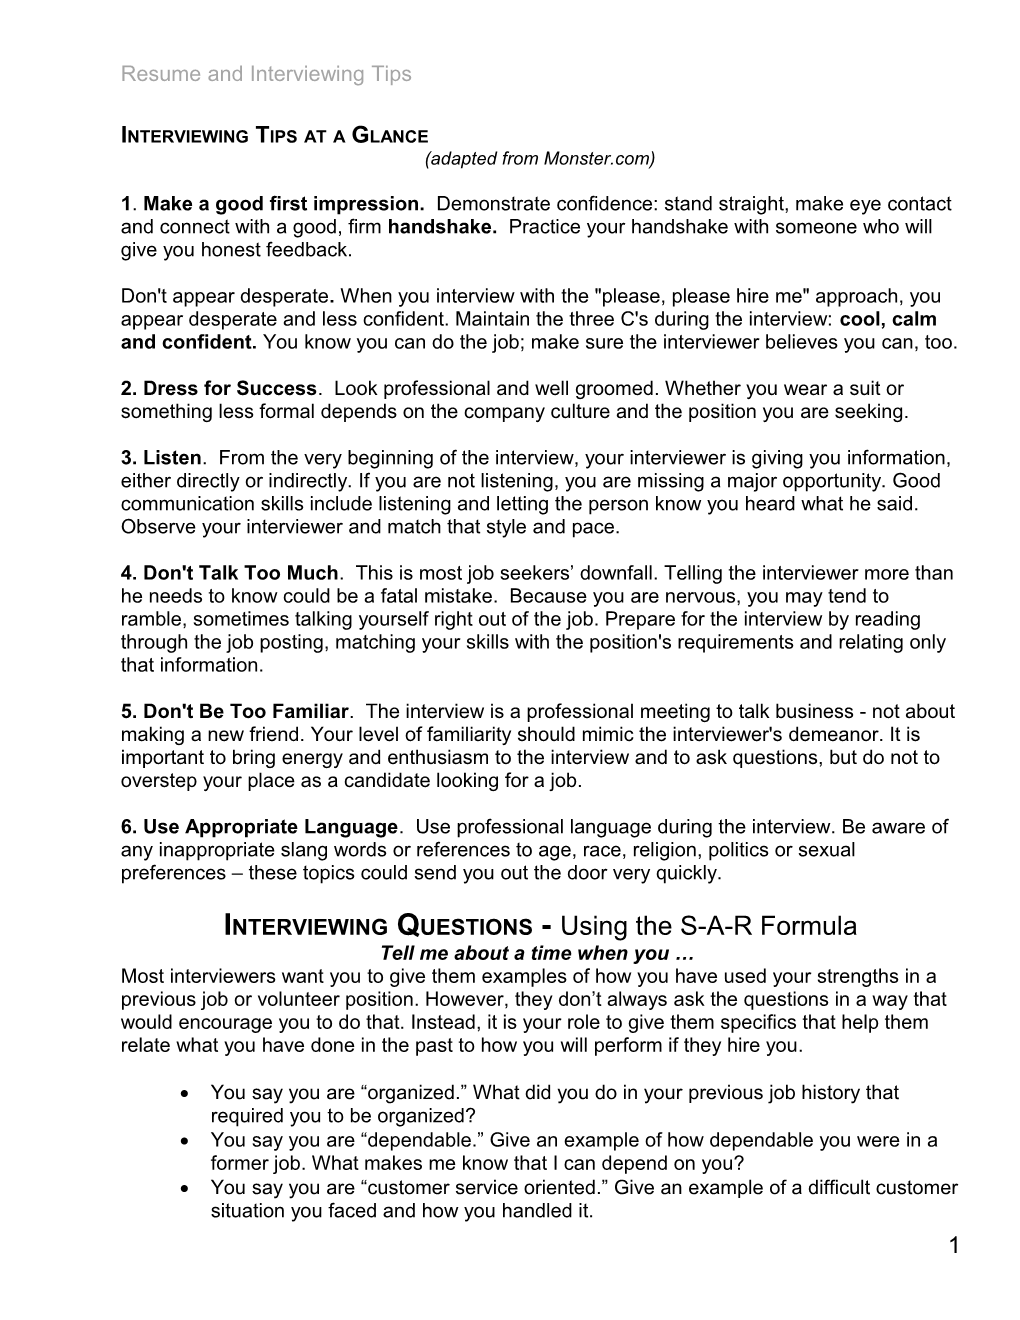 Resume and Interviewing Tips